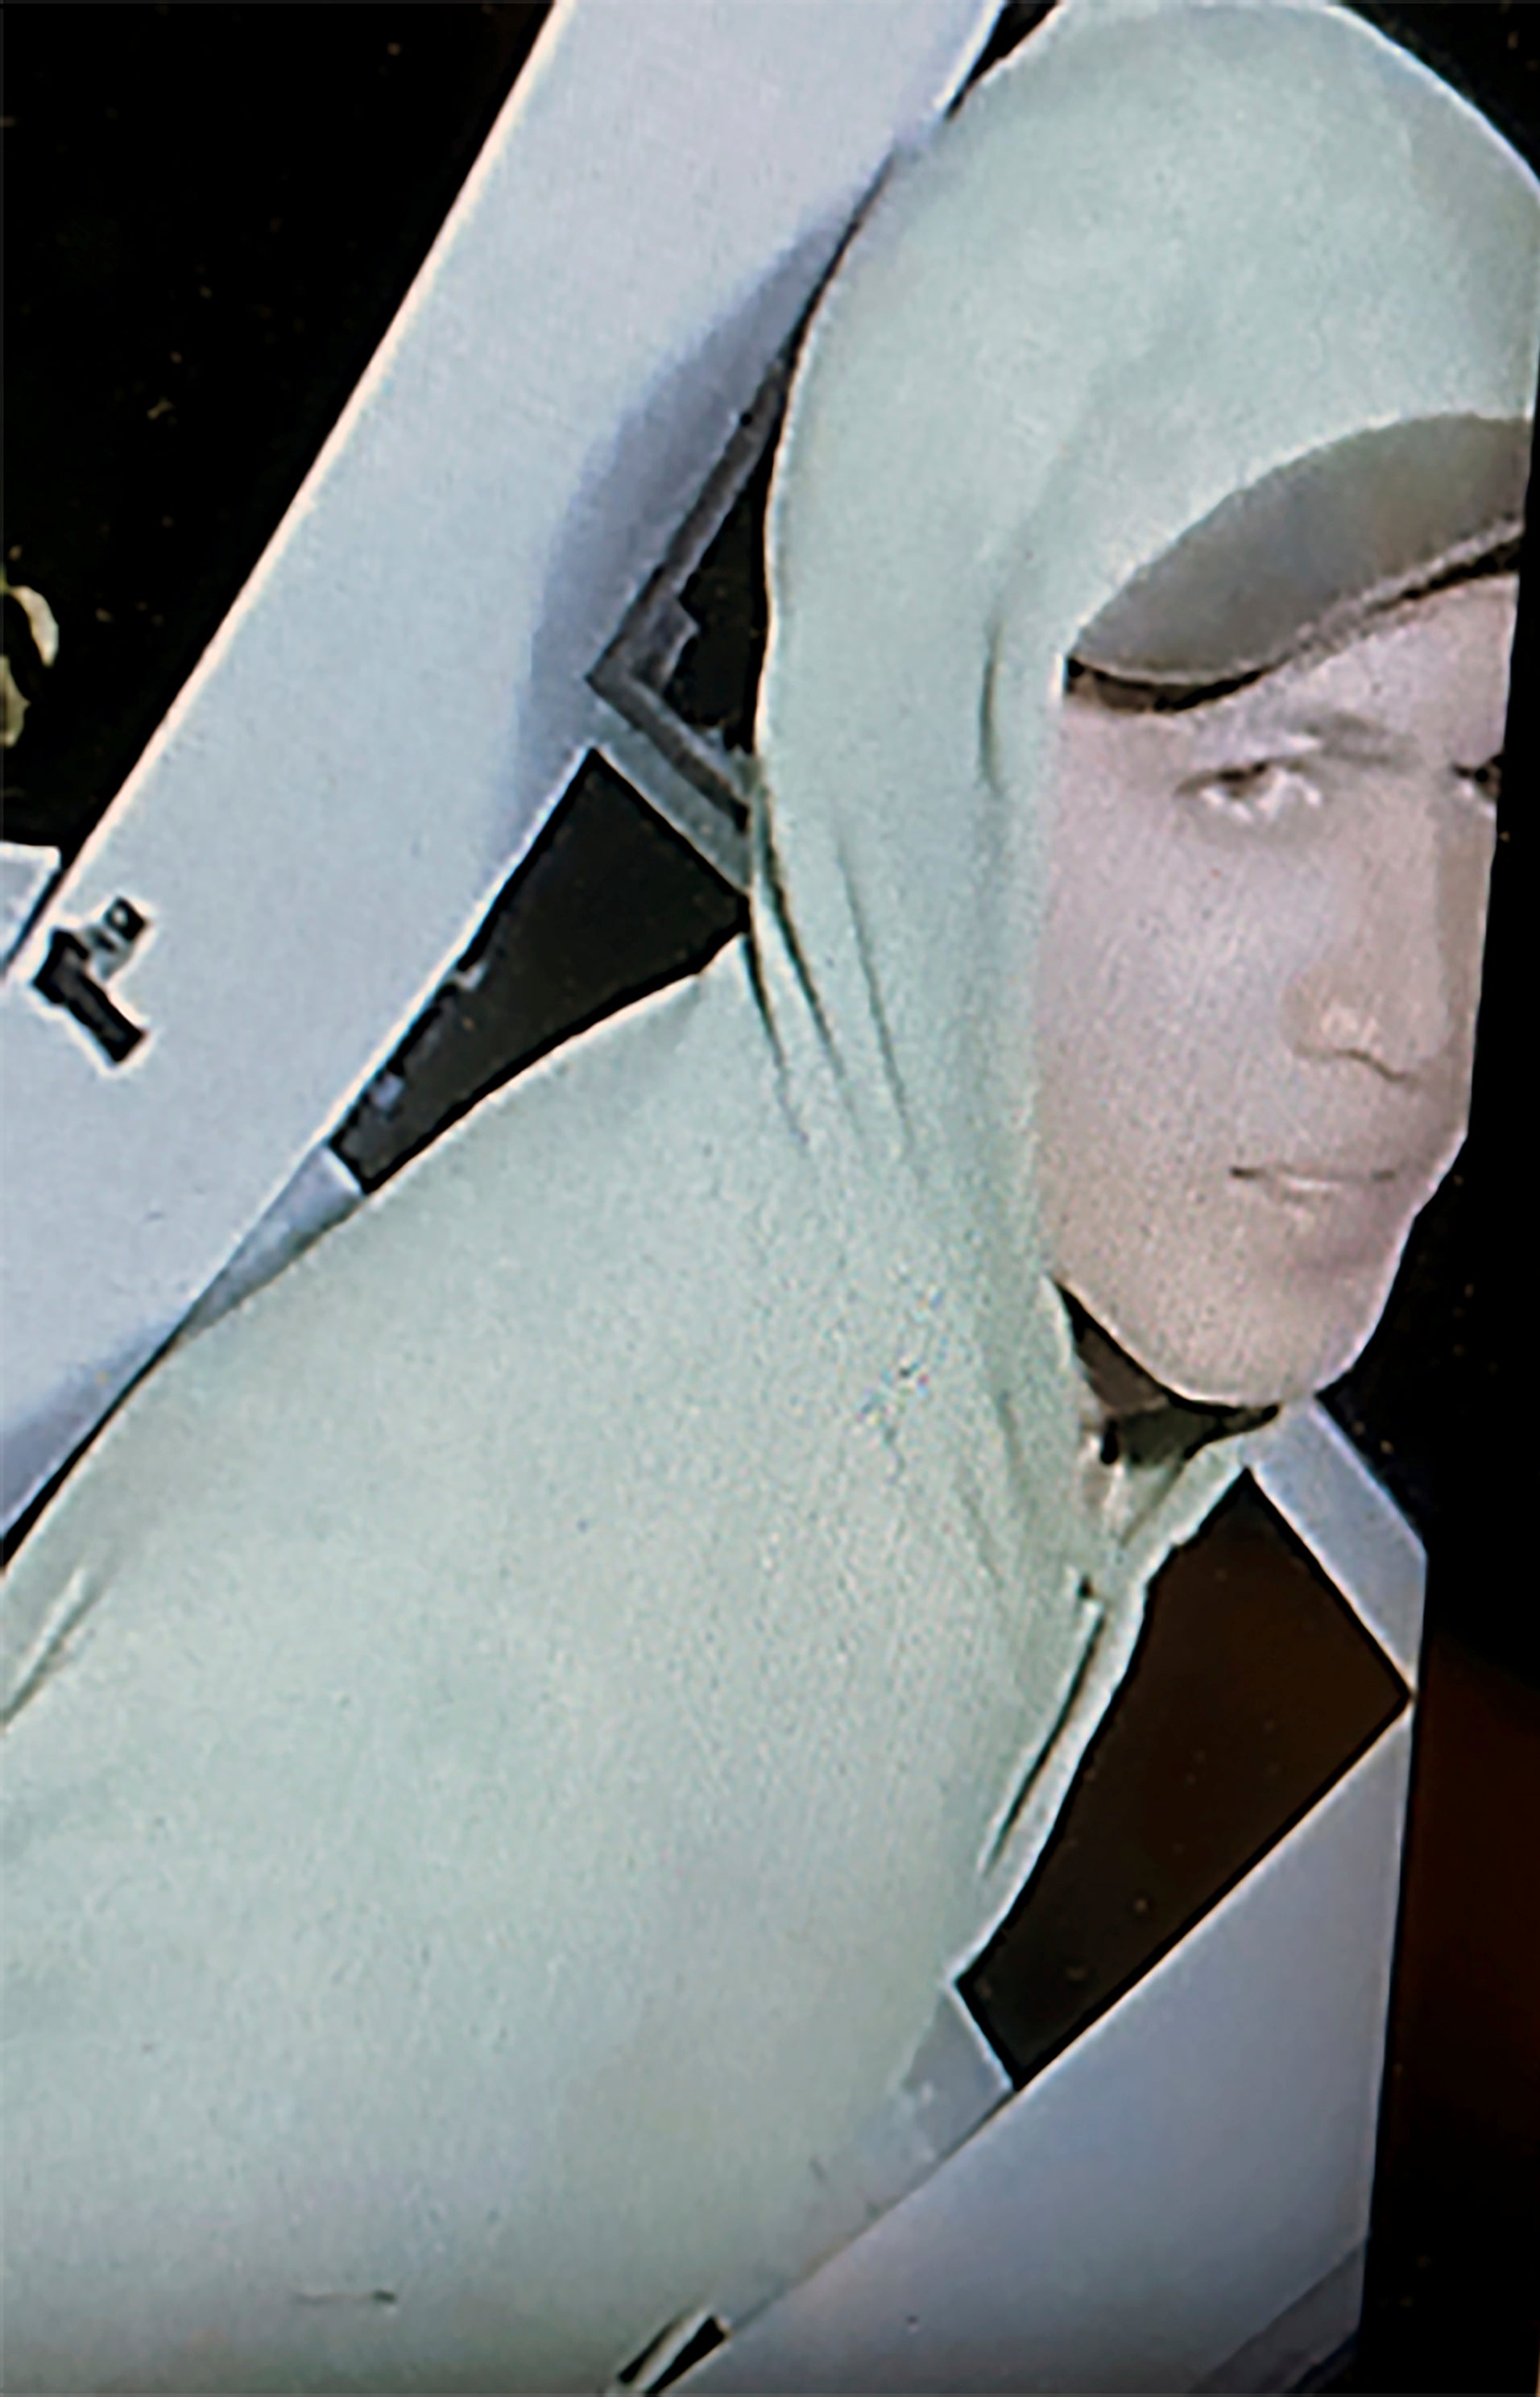 An image provided by the Pennsylvania State Police showing Cavalcante wearing a hoodie